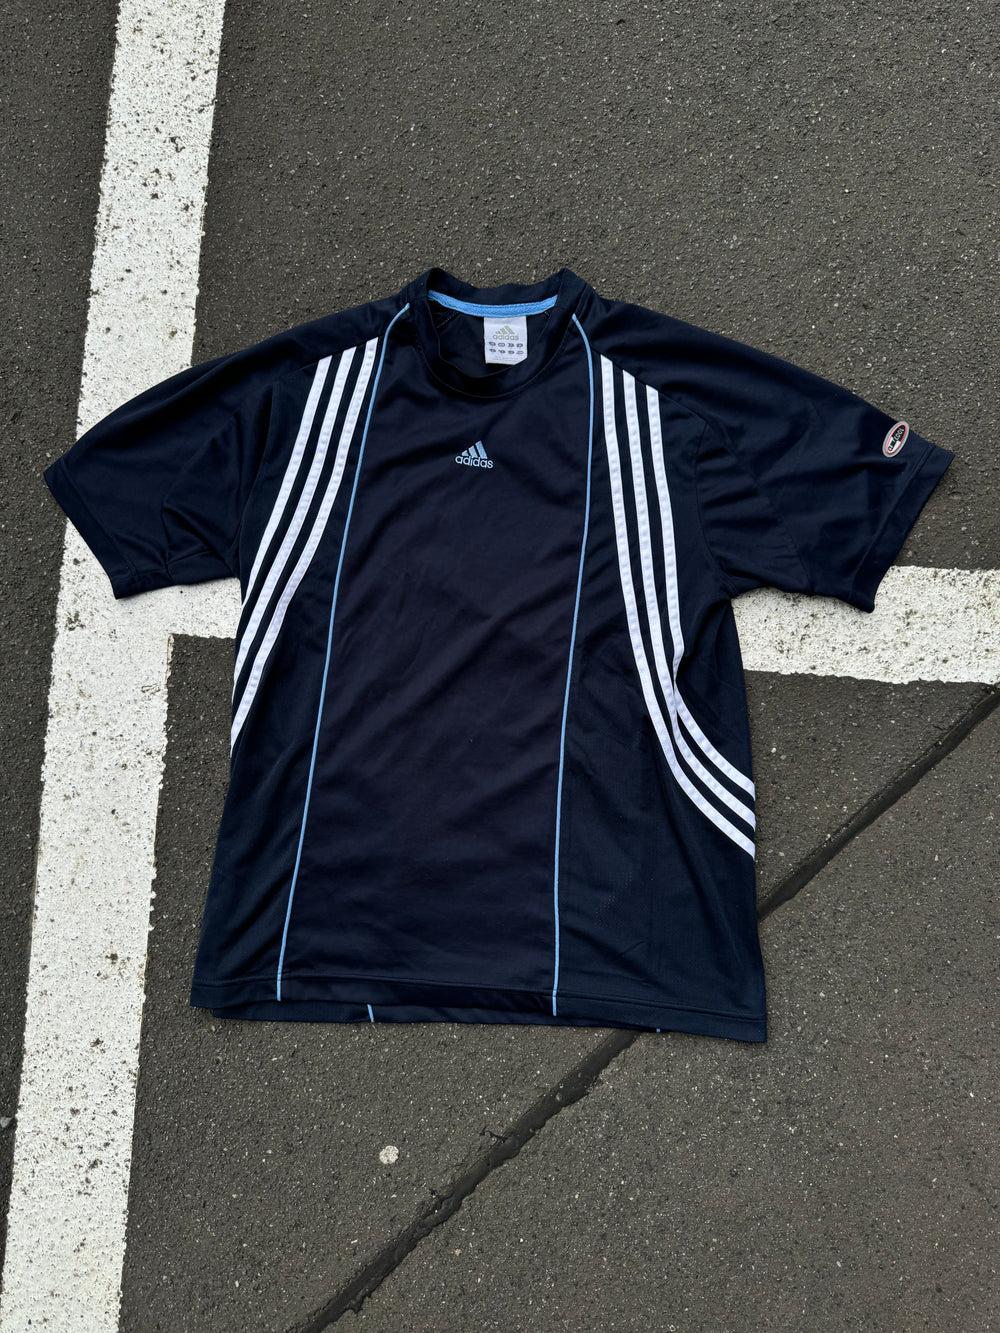 Early 2000s Adidas Climacool T-Shirt Jersey (M)